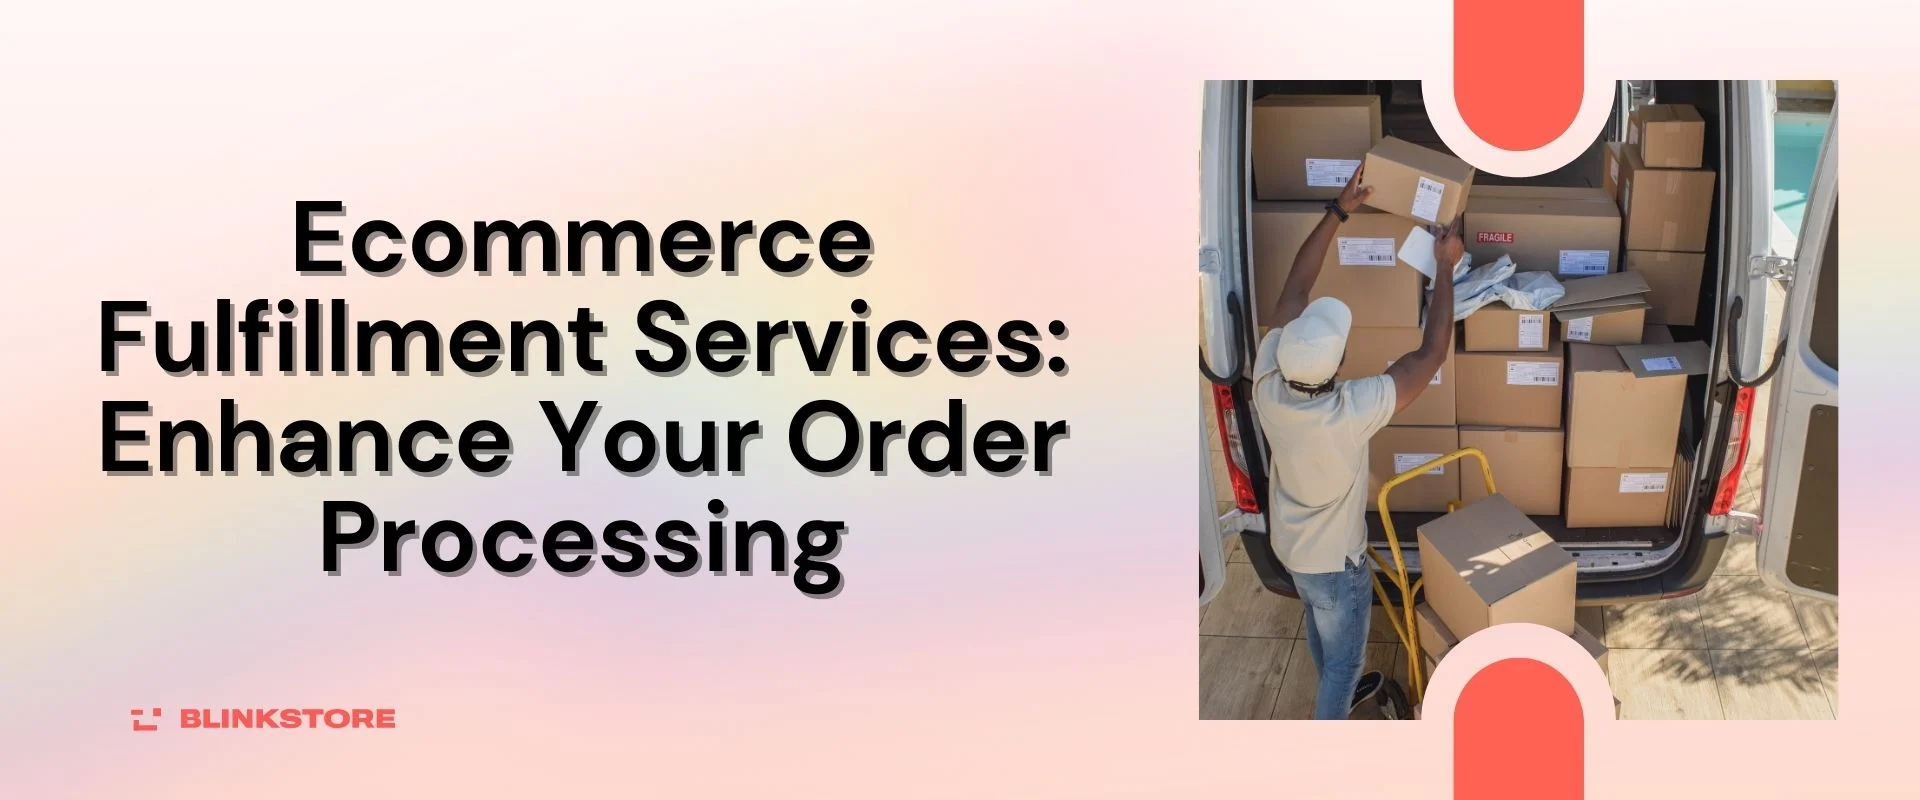 Ecommerce Fulfillment Services: Enhance Your Order Processing